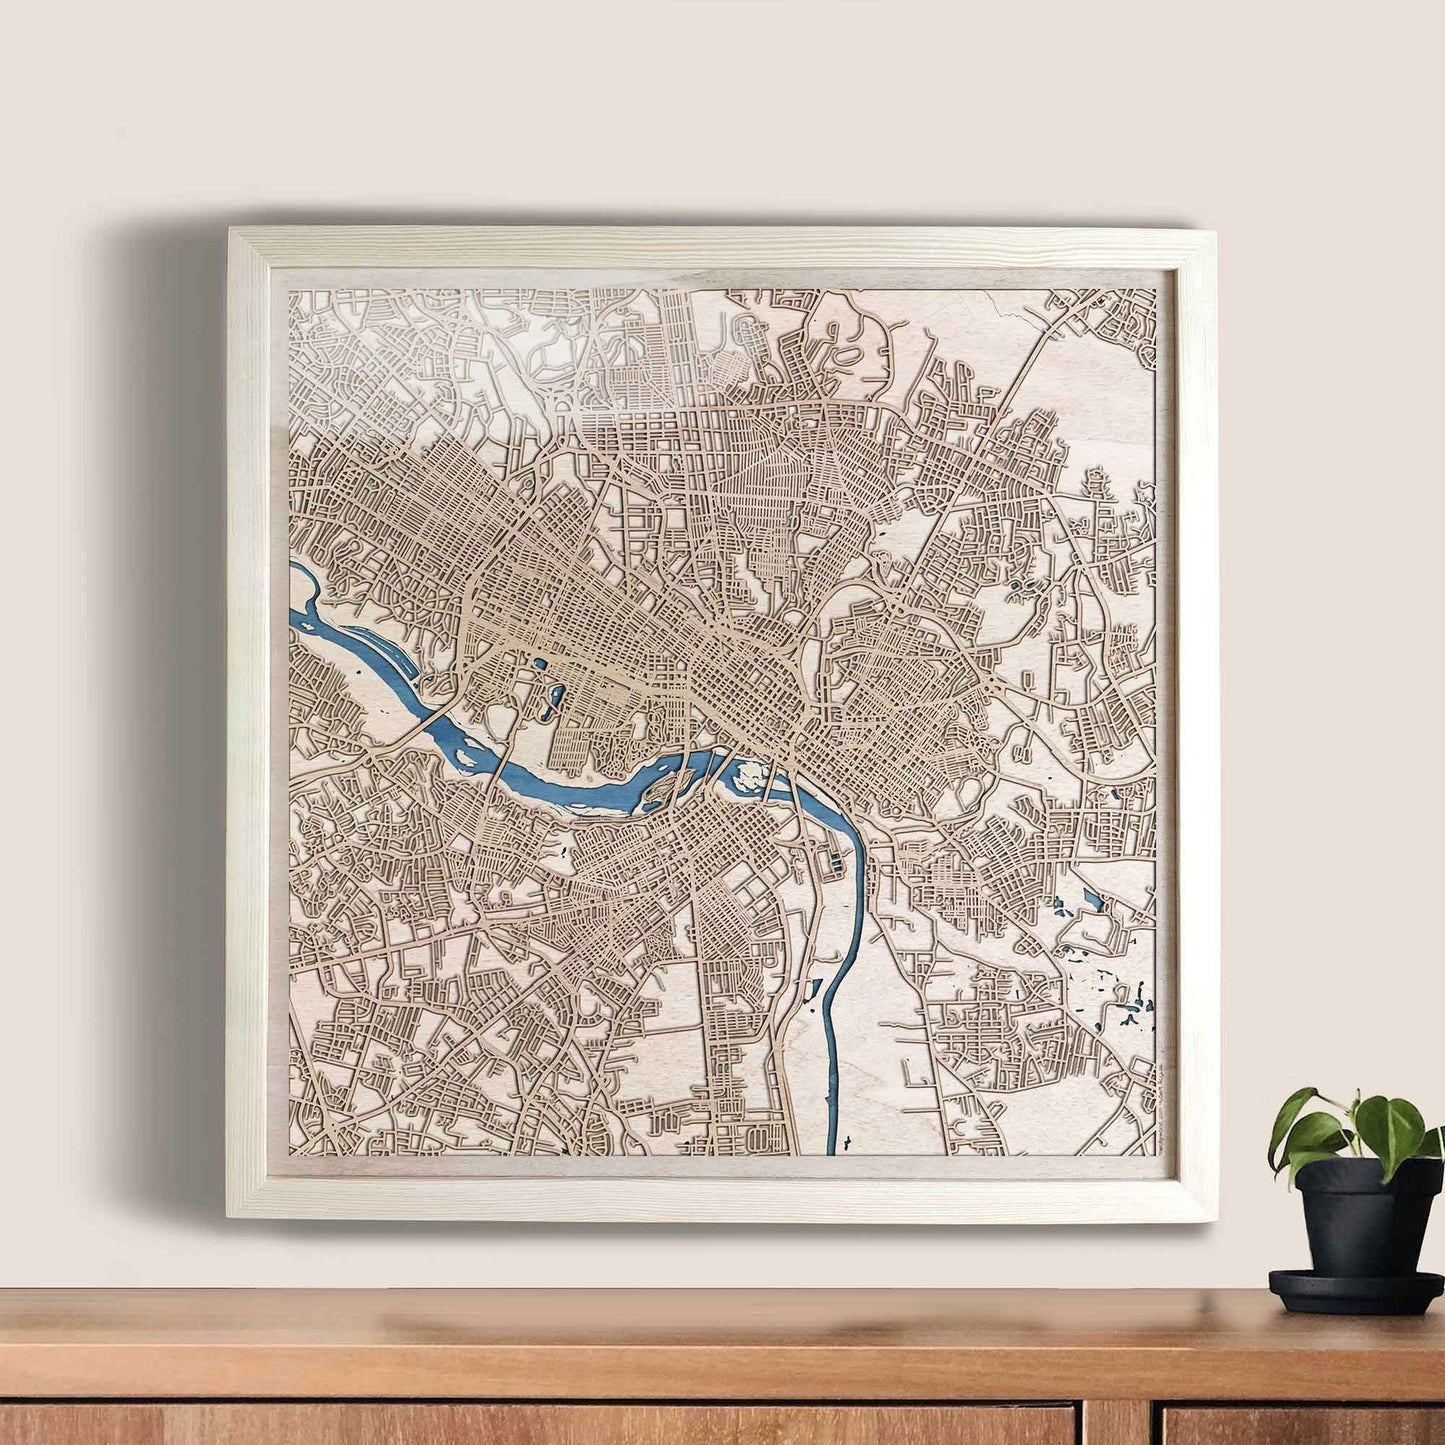 Richmond Wooden Map by CityWood - Custom Wood Map Art - Unique Laser Cut Engraved - Anniversary Gift